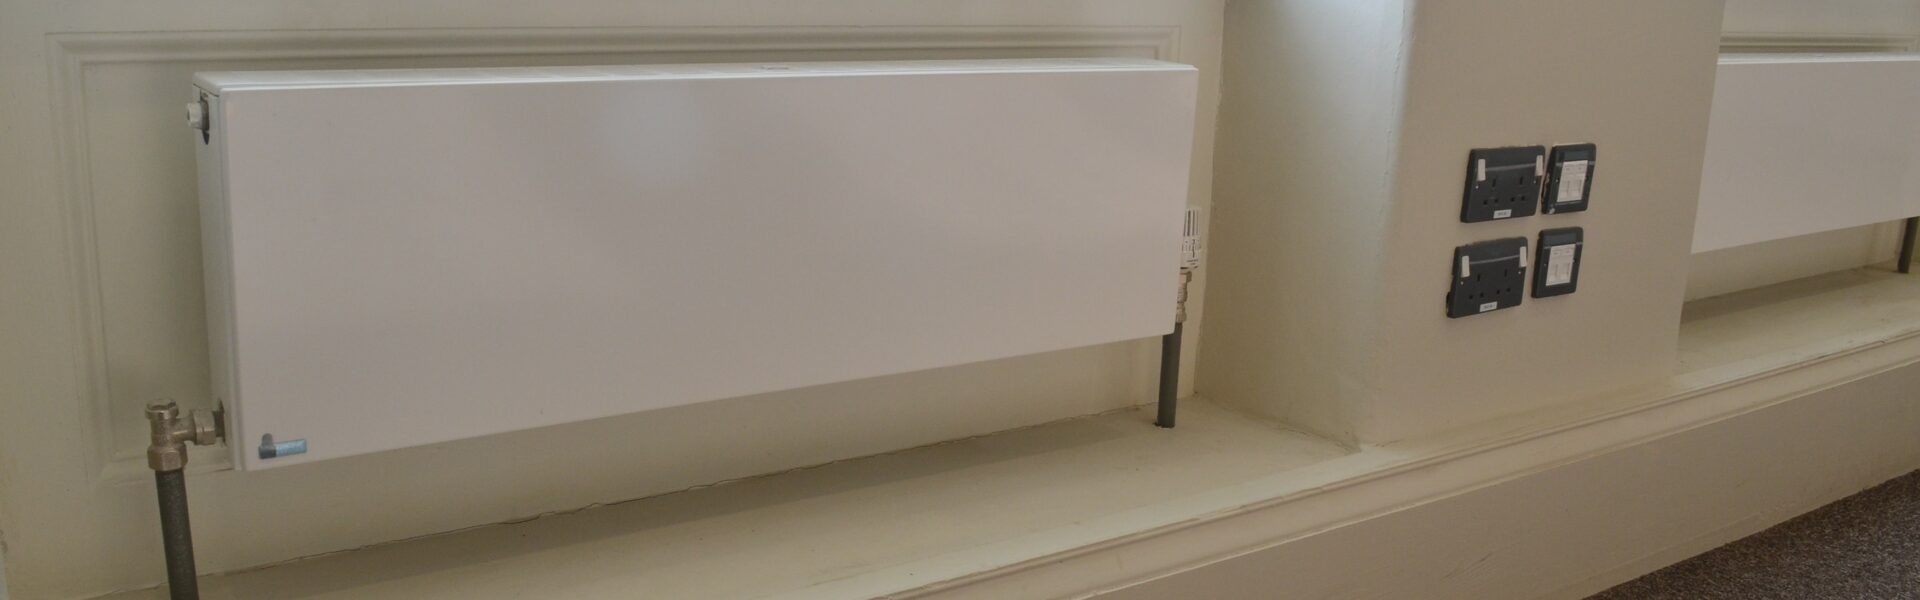 A horizontal Planar in the offices at the Hall for Cornwall.